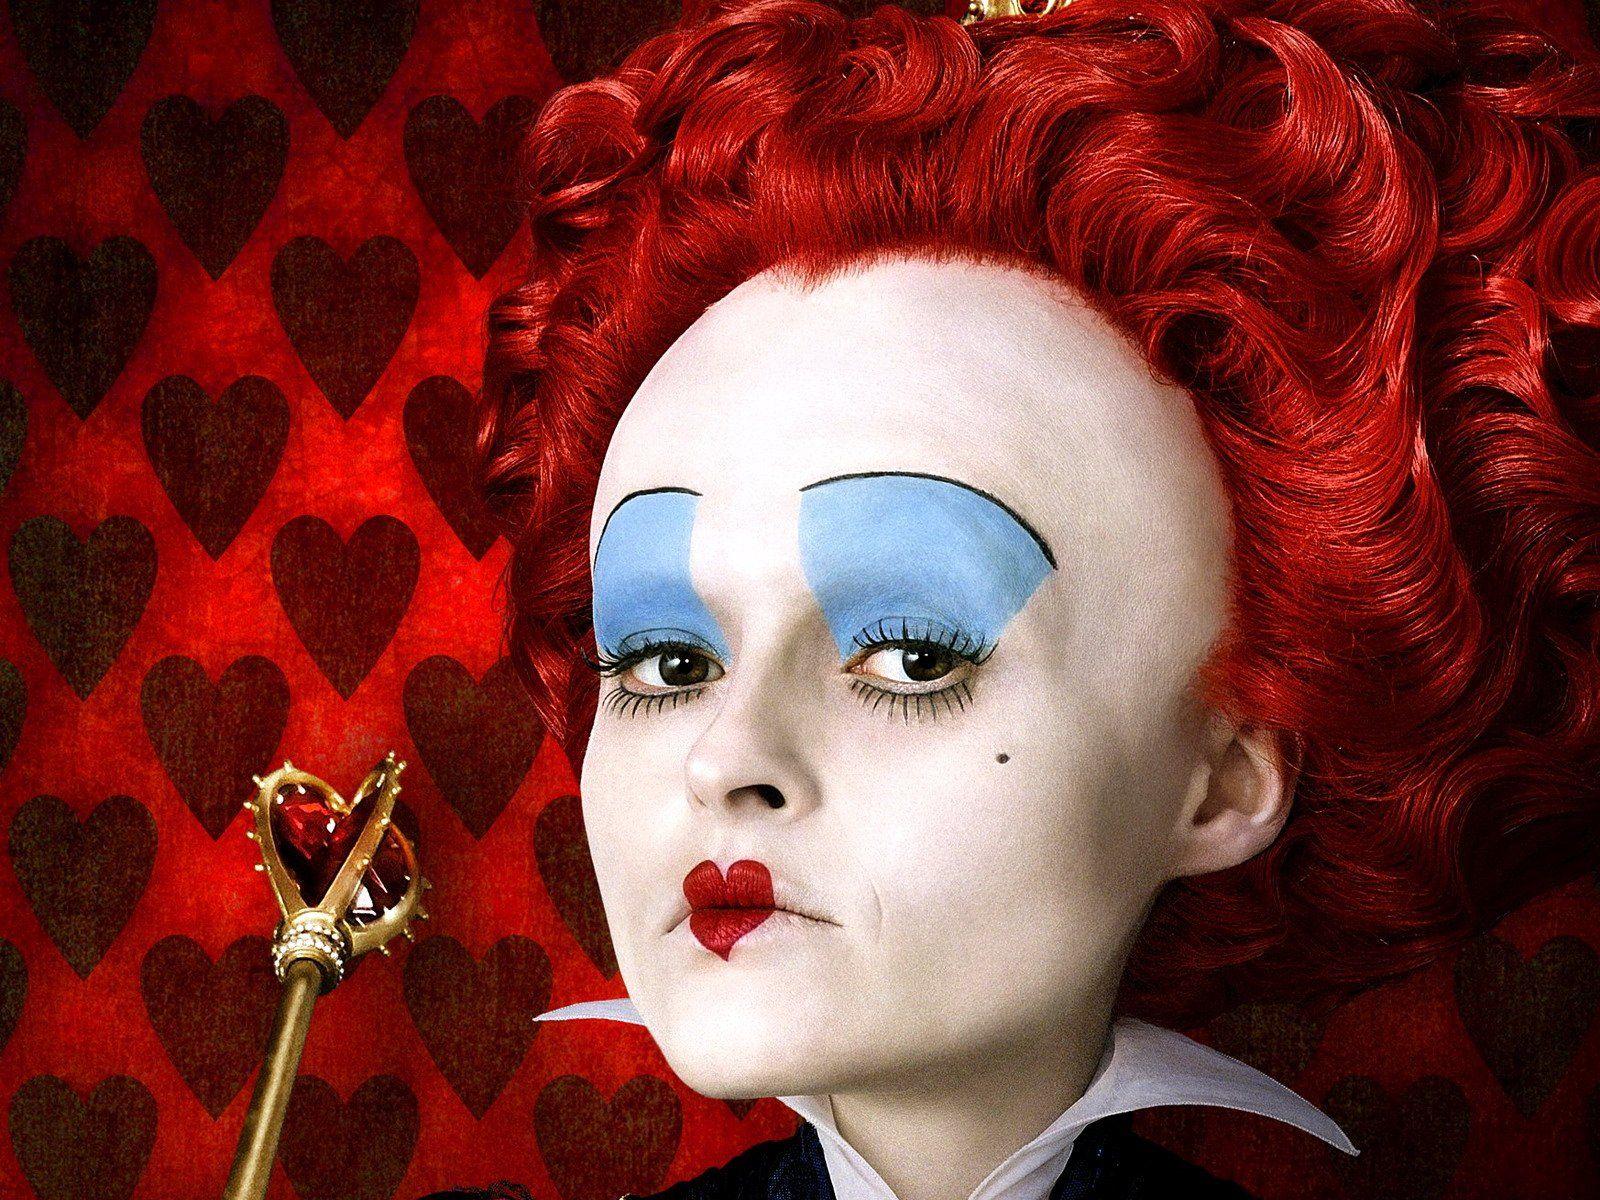 Download the Red Queen of Hearts Wallpaper, Red Queen of Hearts